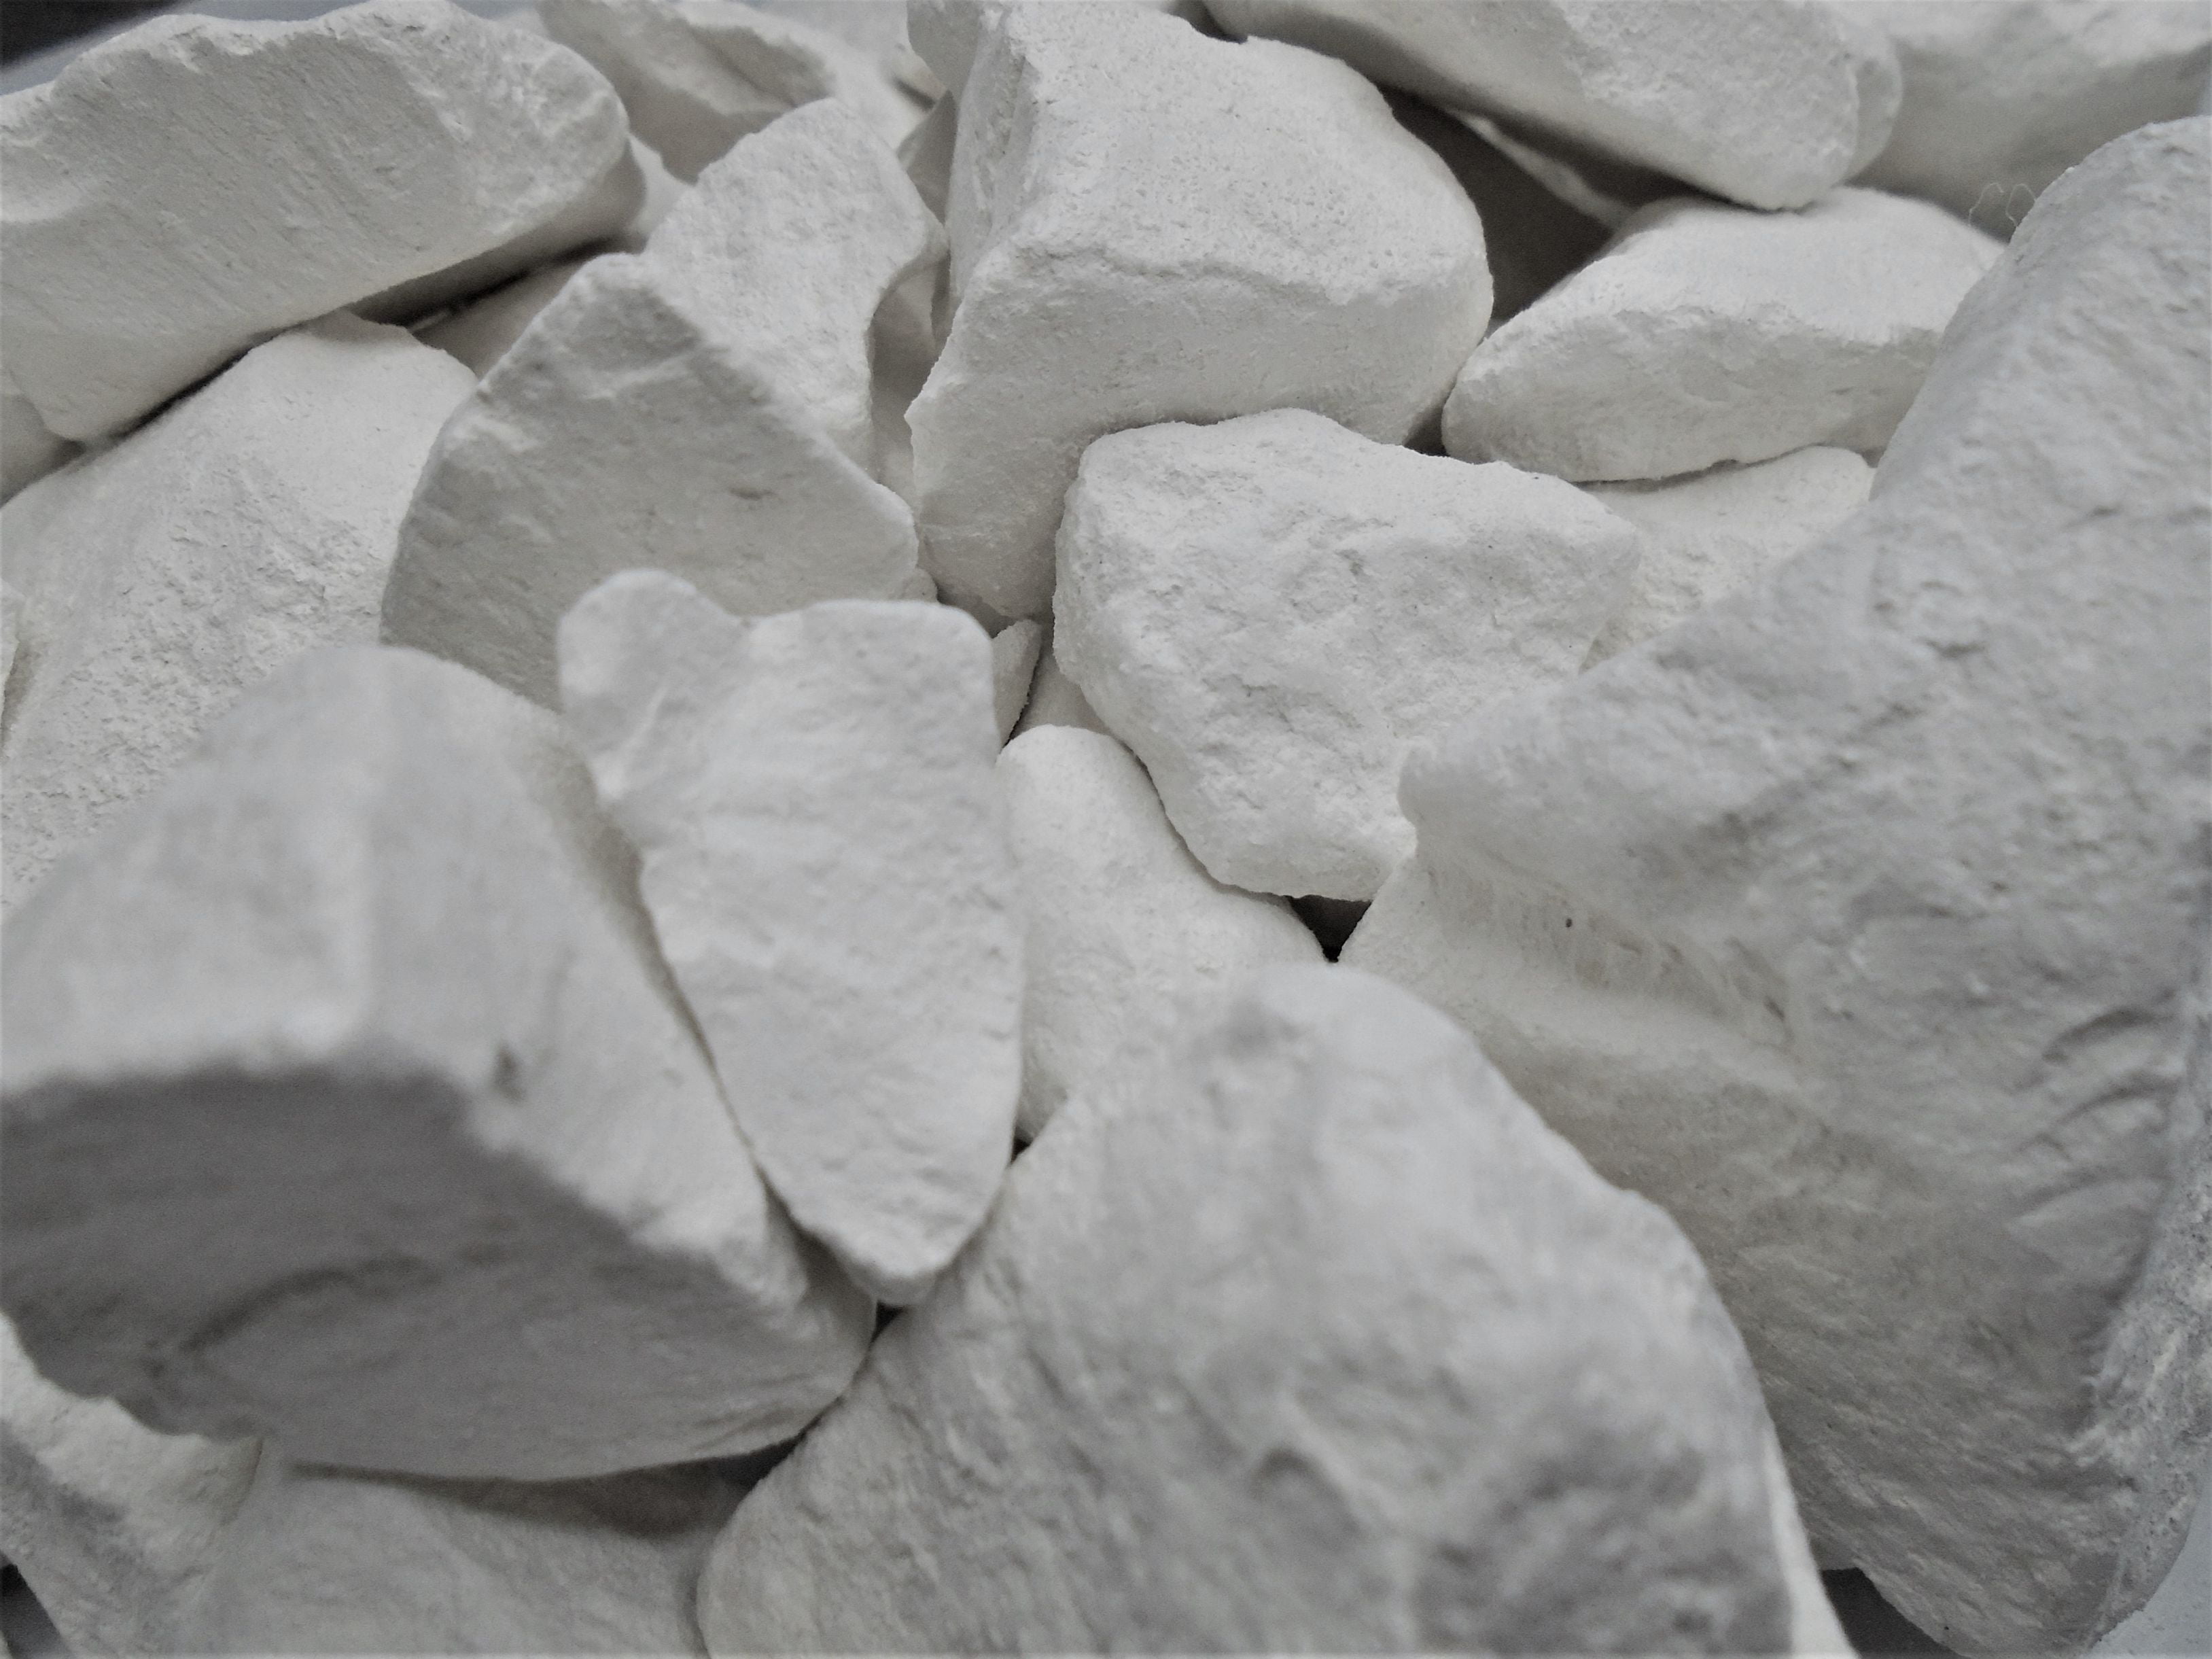 WHITE DIRT KAOLIN from the source - Georgia - not up north where they have  none - there are no kaolin mines up north.